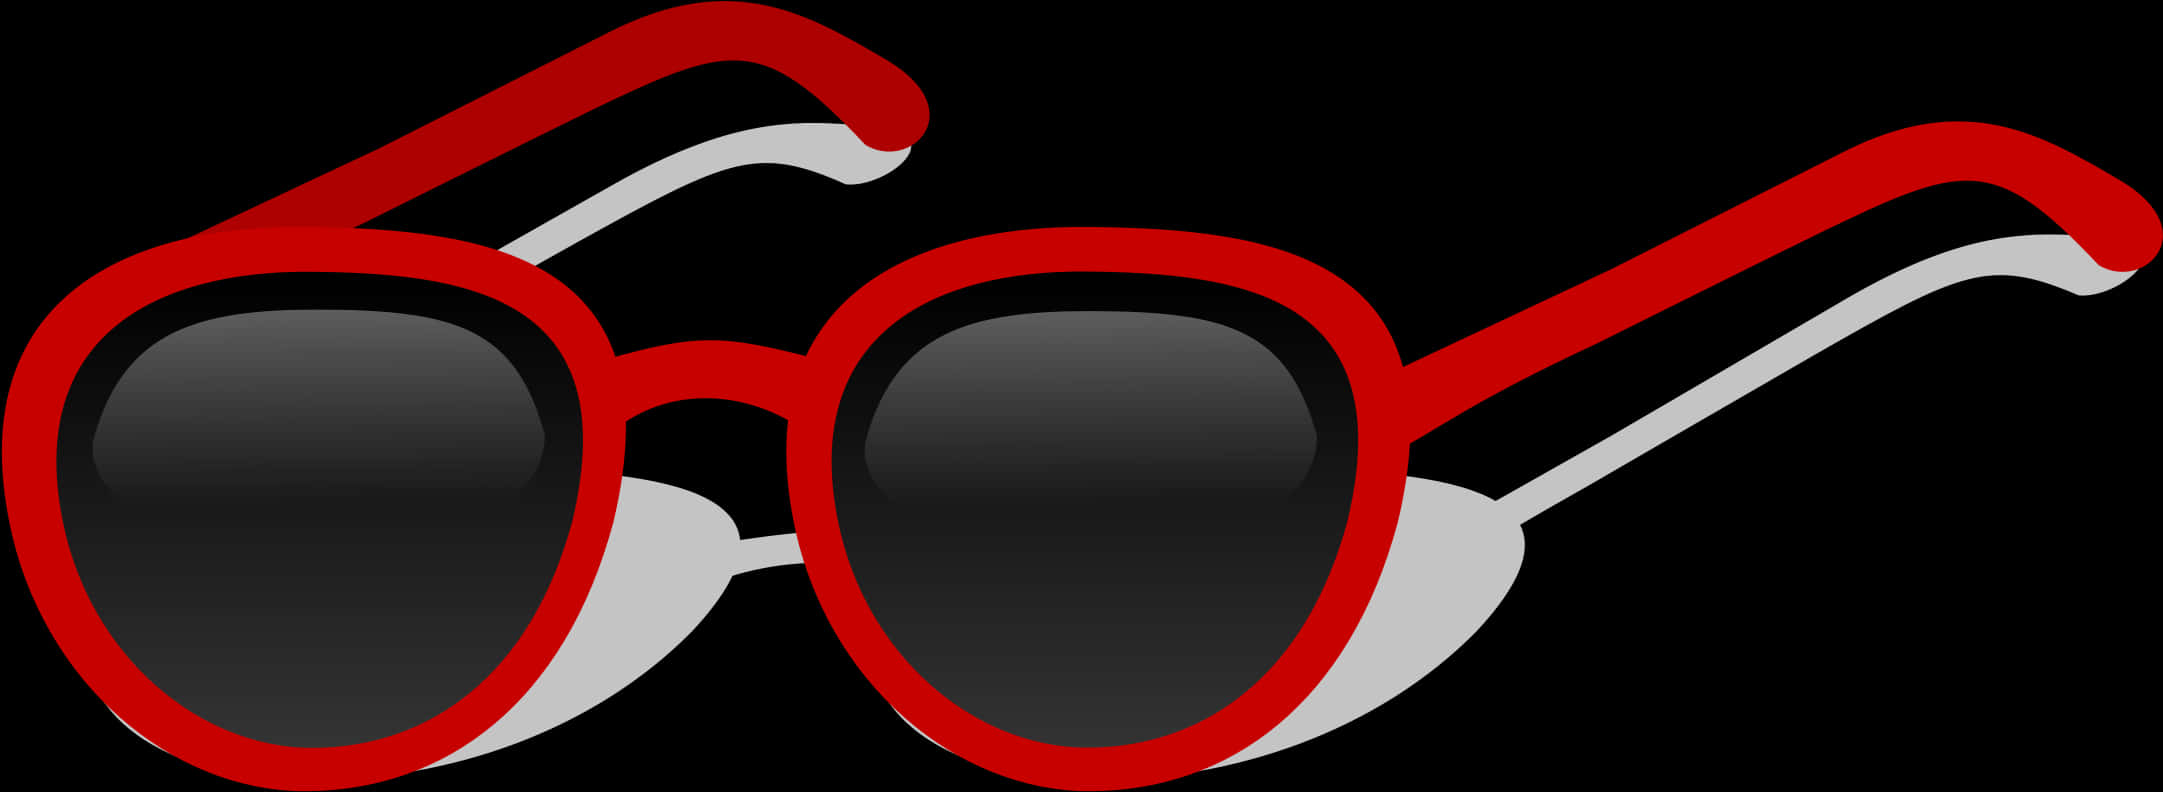 A Red And White Sunglasses